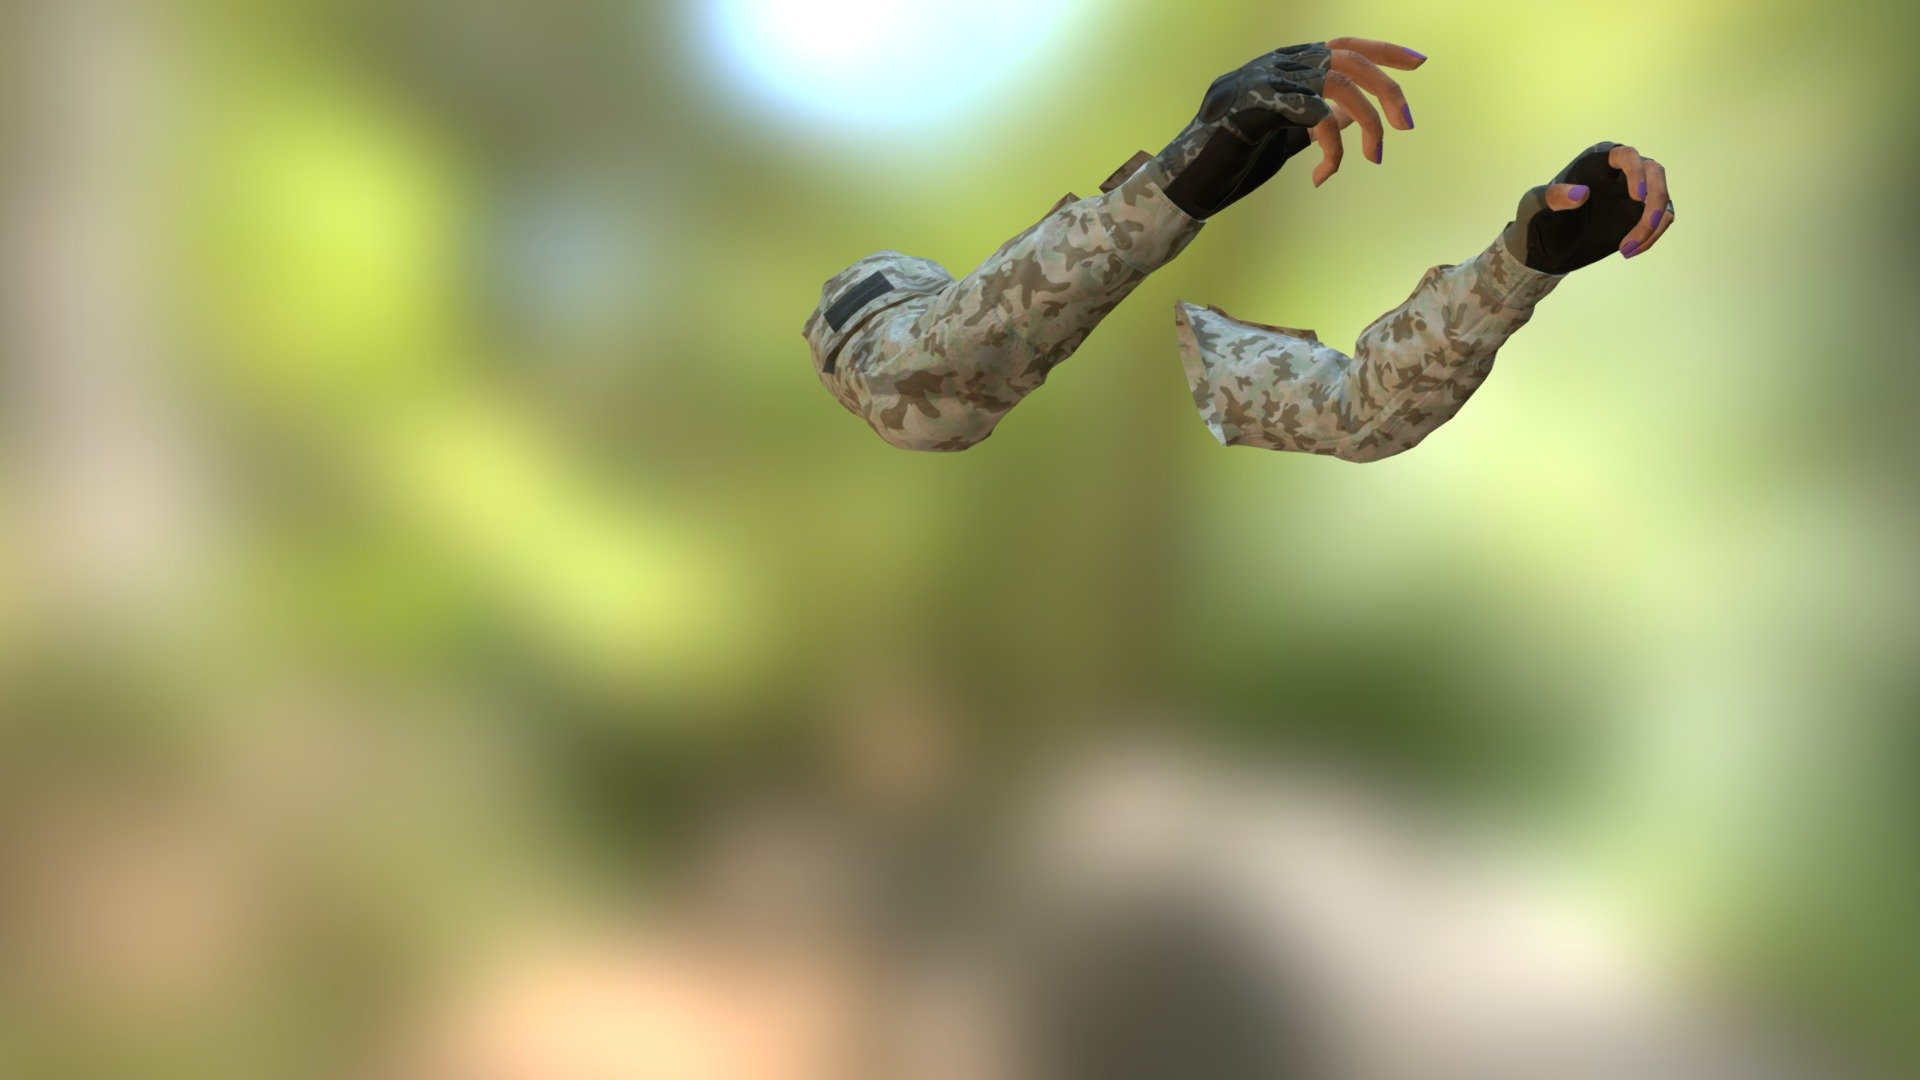 A “handy” set of assets for any modern first person game.   The Ironbelly Studios First Person Arms pack is available for purchase and comes with fully rigged and animated sets of three types of arms. Each arm pair has three included skin tones (Light, Medium, and Dark). Each female pair has five nail polish options. Additionally, we have included military fatigues and fingerless gloves with two camo textures, which are compatible with both male and female arm models. The First Person Arm Pack is perfect for customization into any first or third person product!   ###Buy it on the Unreal Marketplace - First Person Arms, Female Military - 3D model by Ironbelly Studios (@ironbelly) 3d model